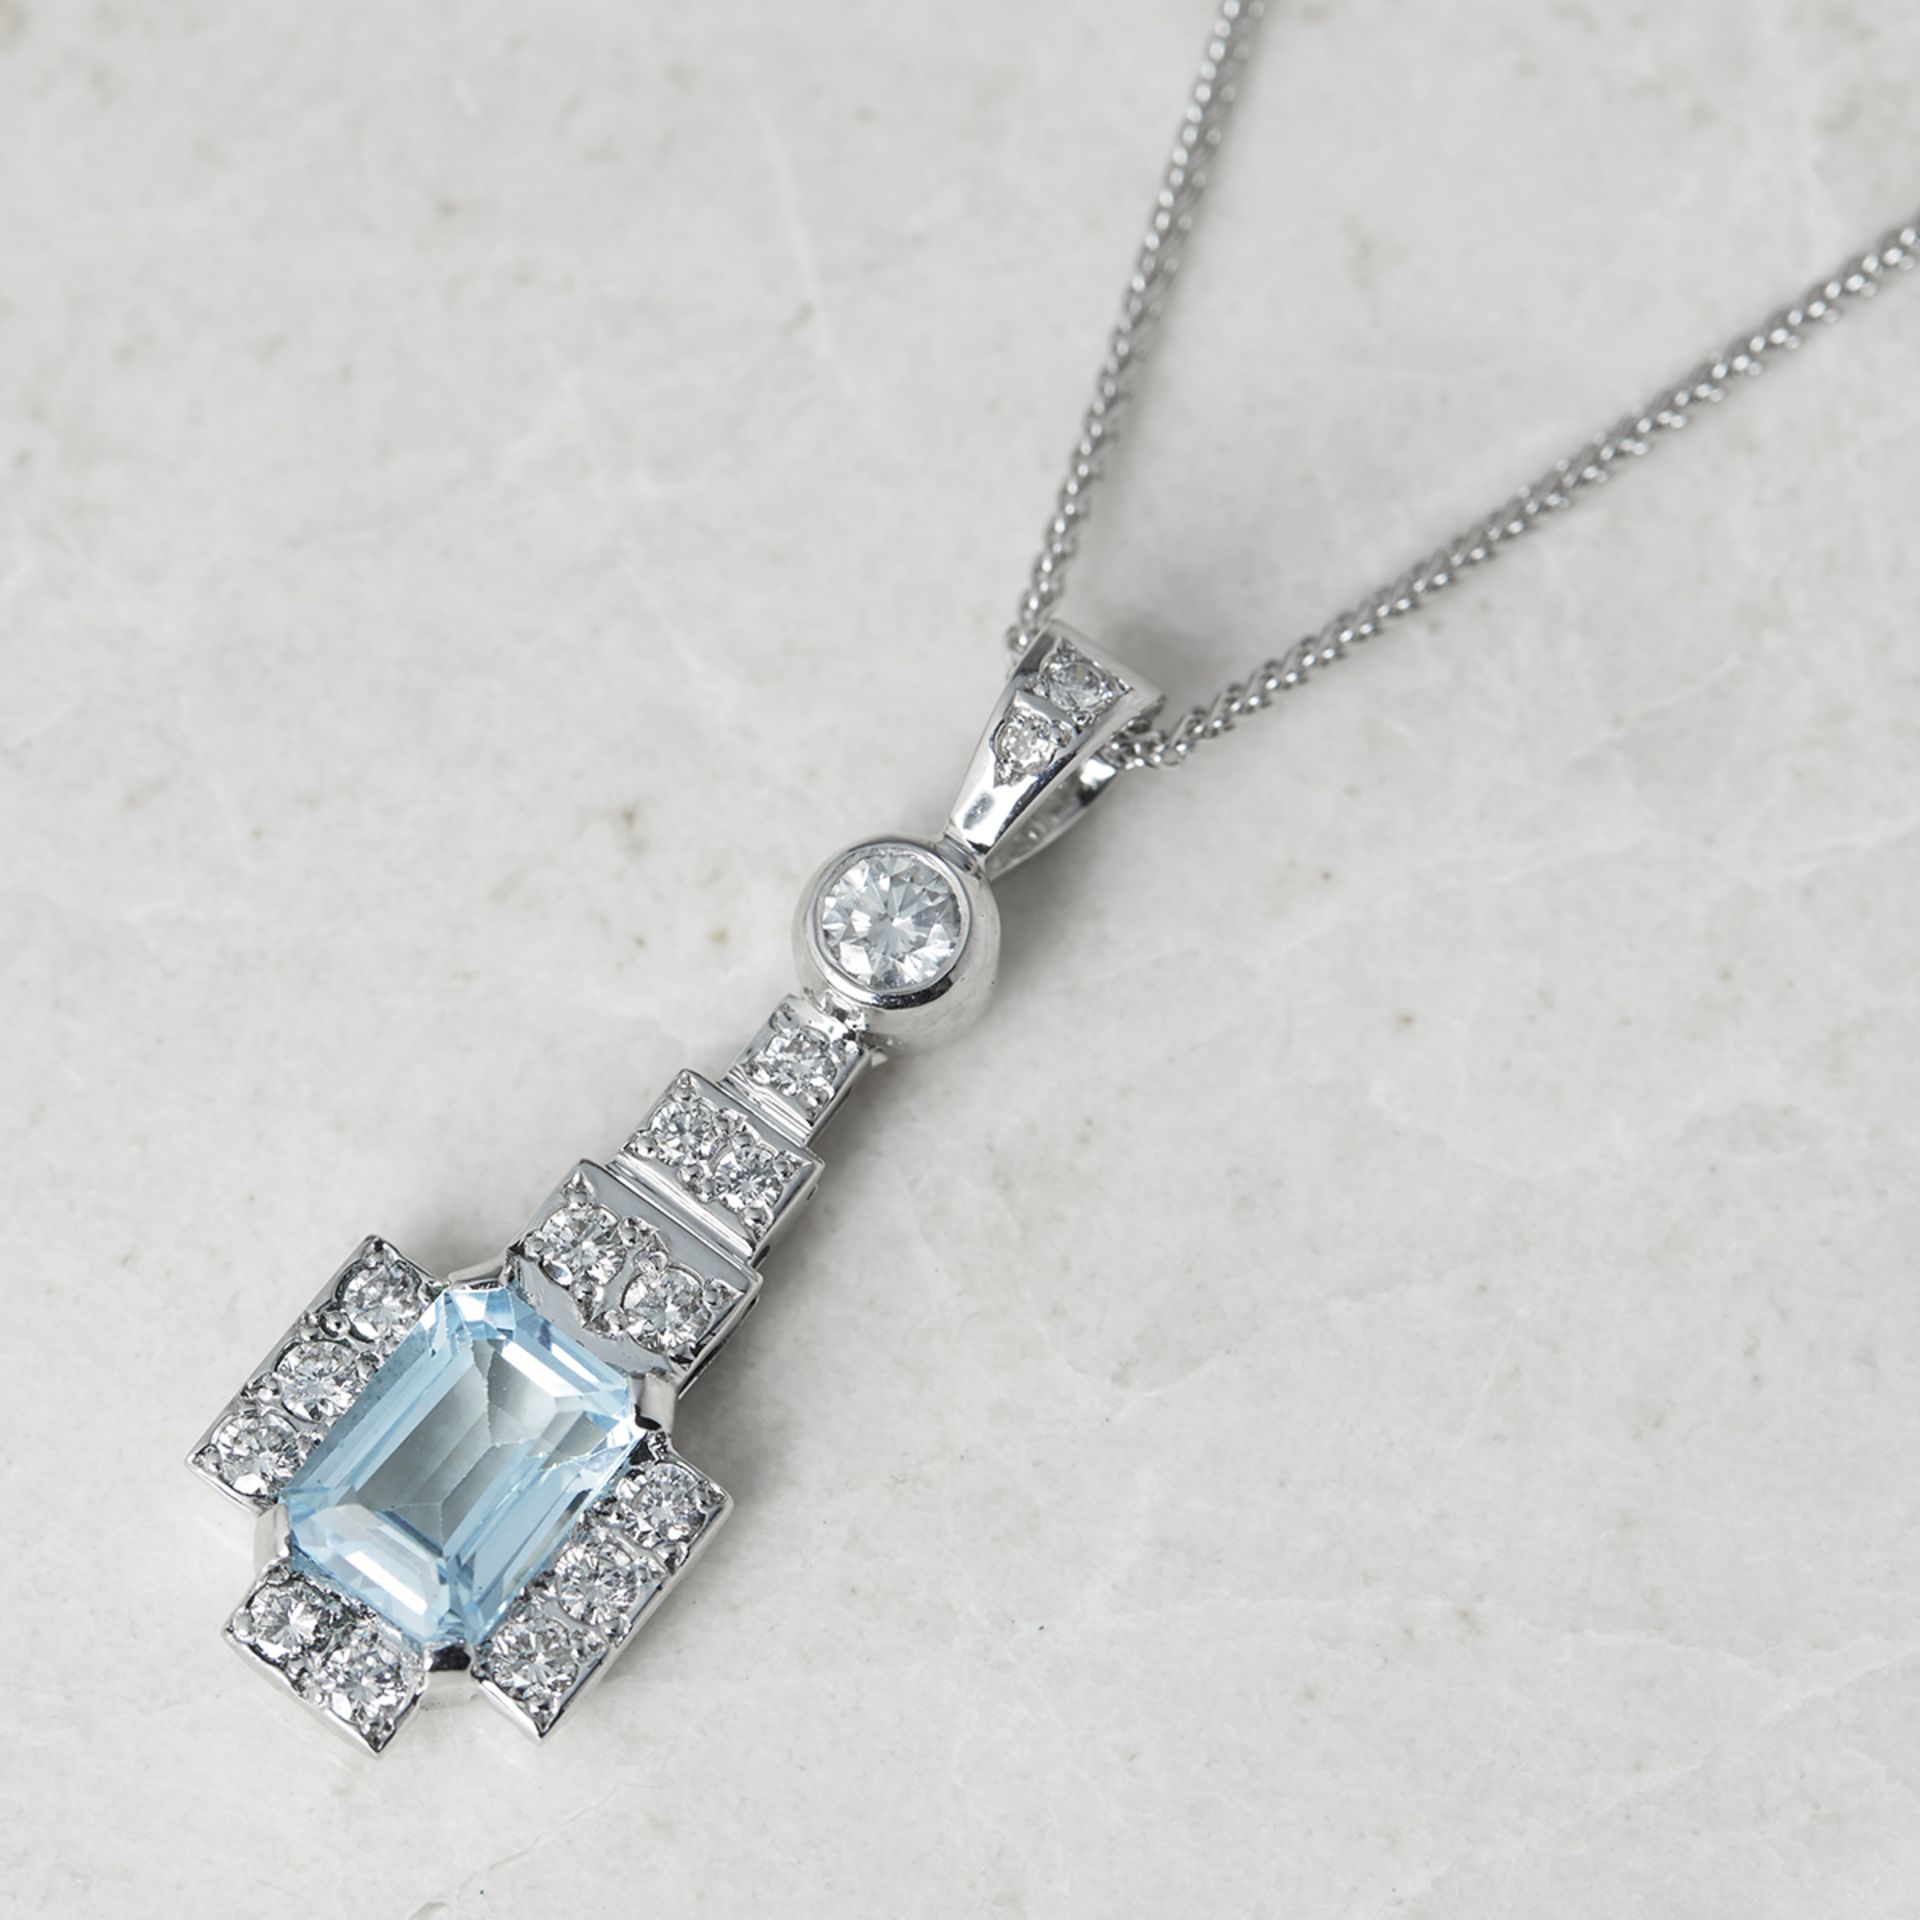 Unbranded, 18k White Gold 1.50ct Blue Topaz & 0.60ct Diamond Necklace - Image 2 of 6